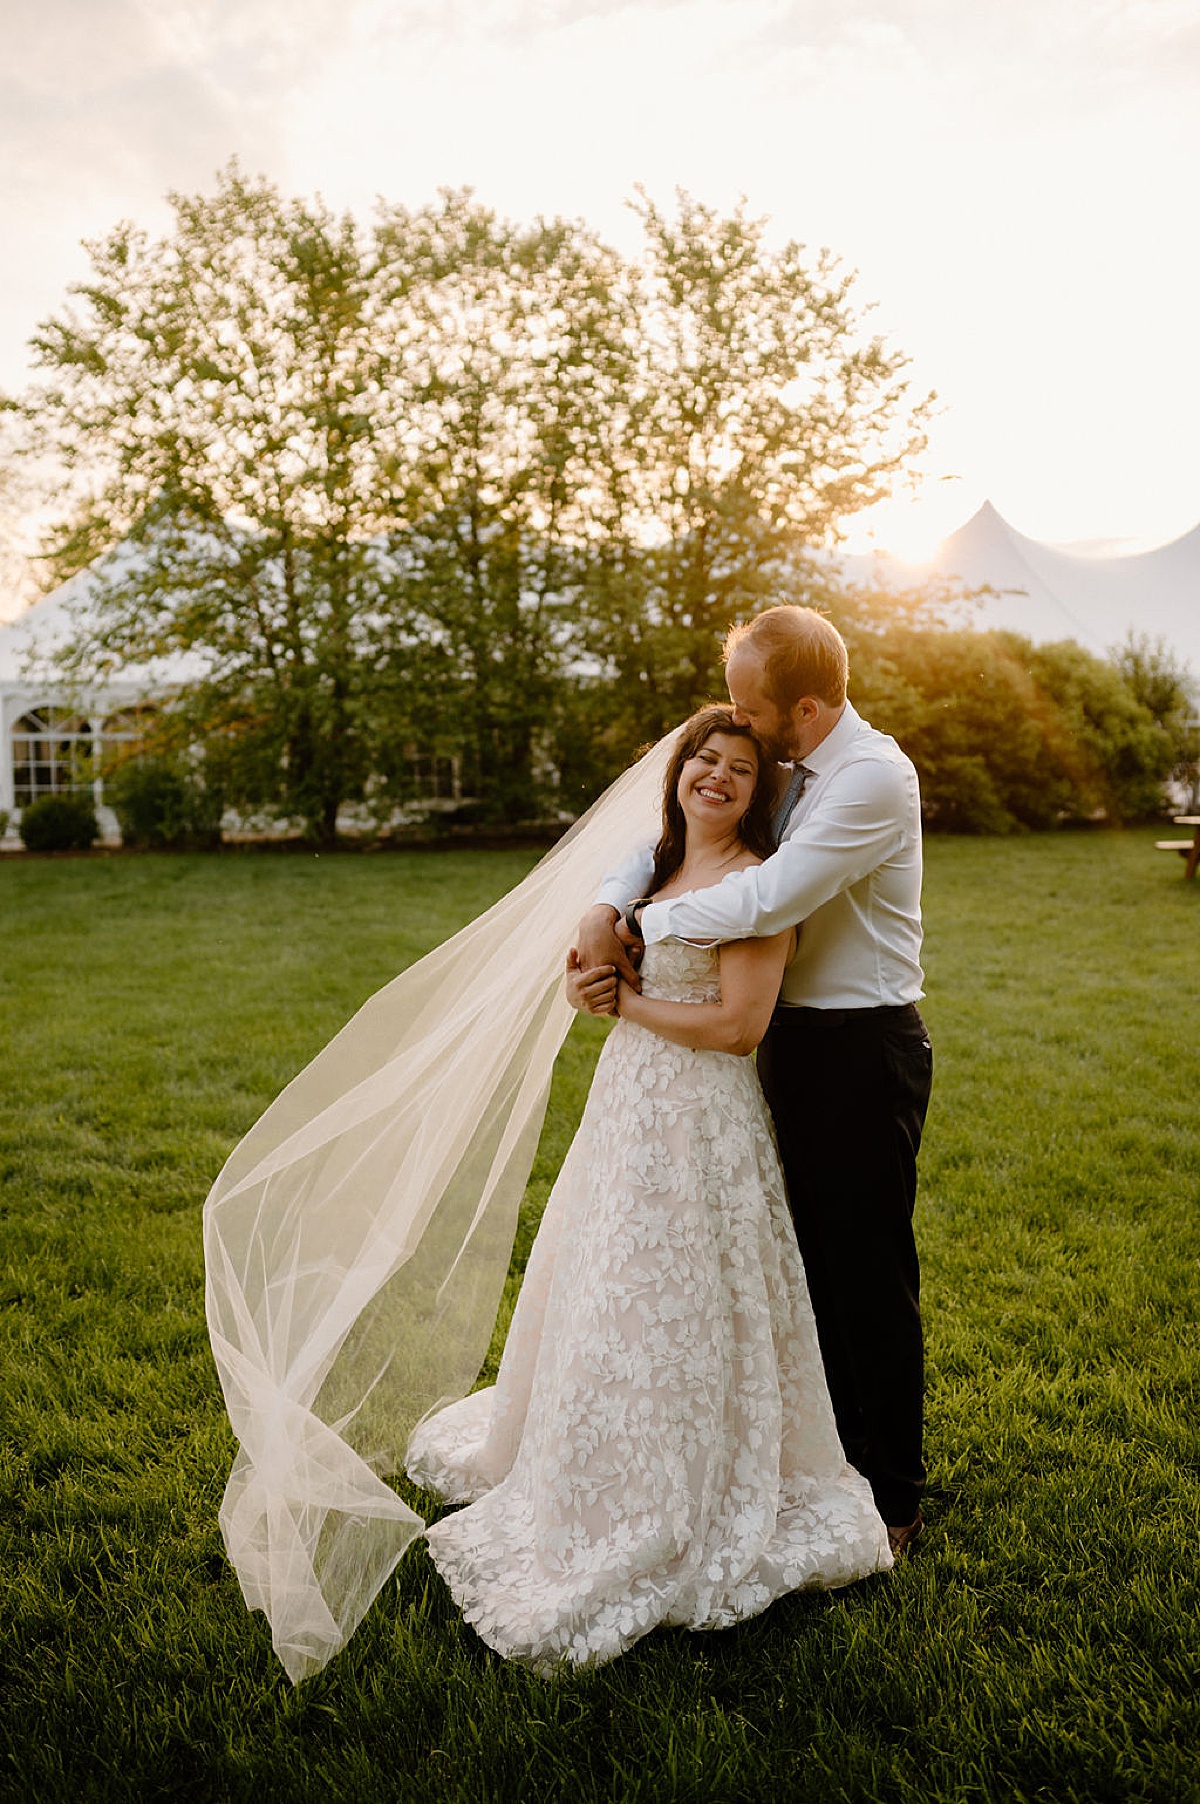 groom kisses bride's forehead during golden hour on venue lawn after ceremony shot by midwest wedding photographer